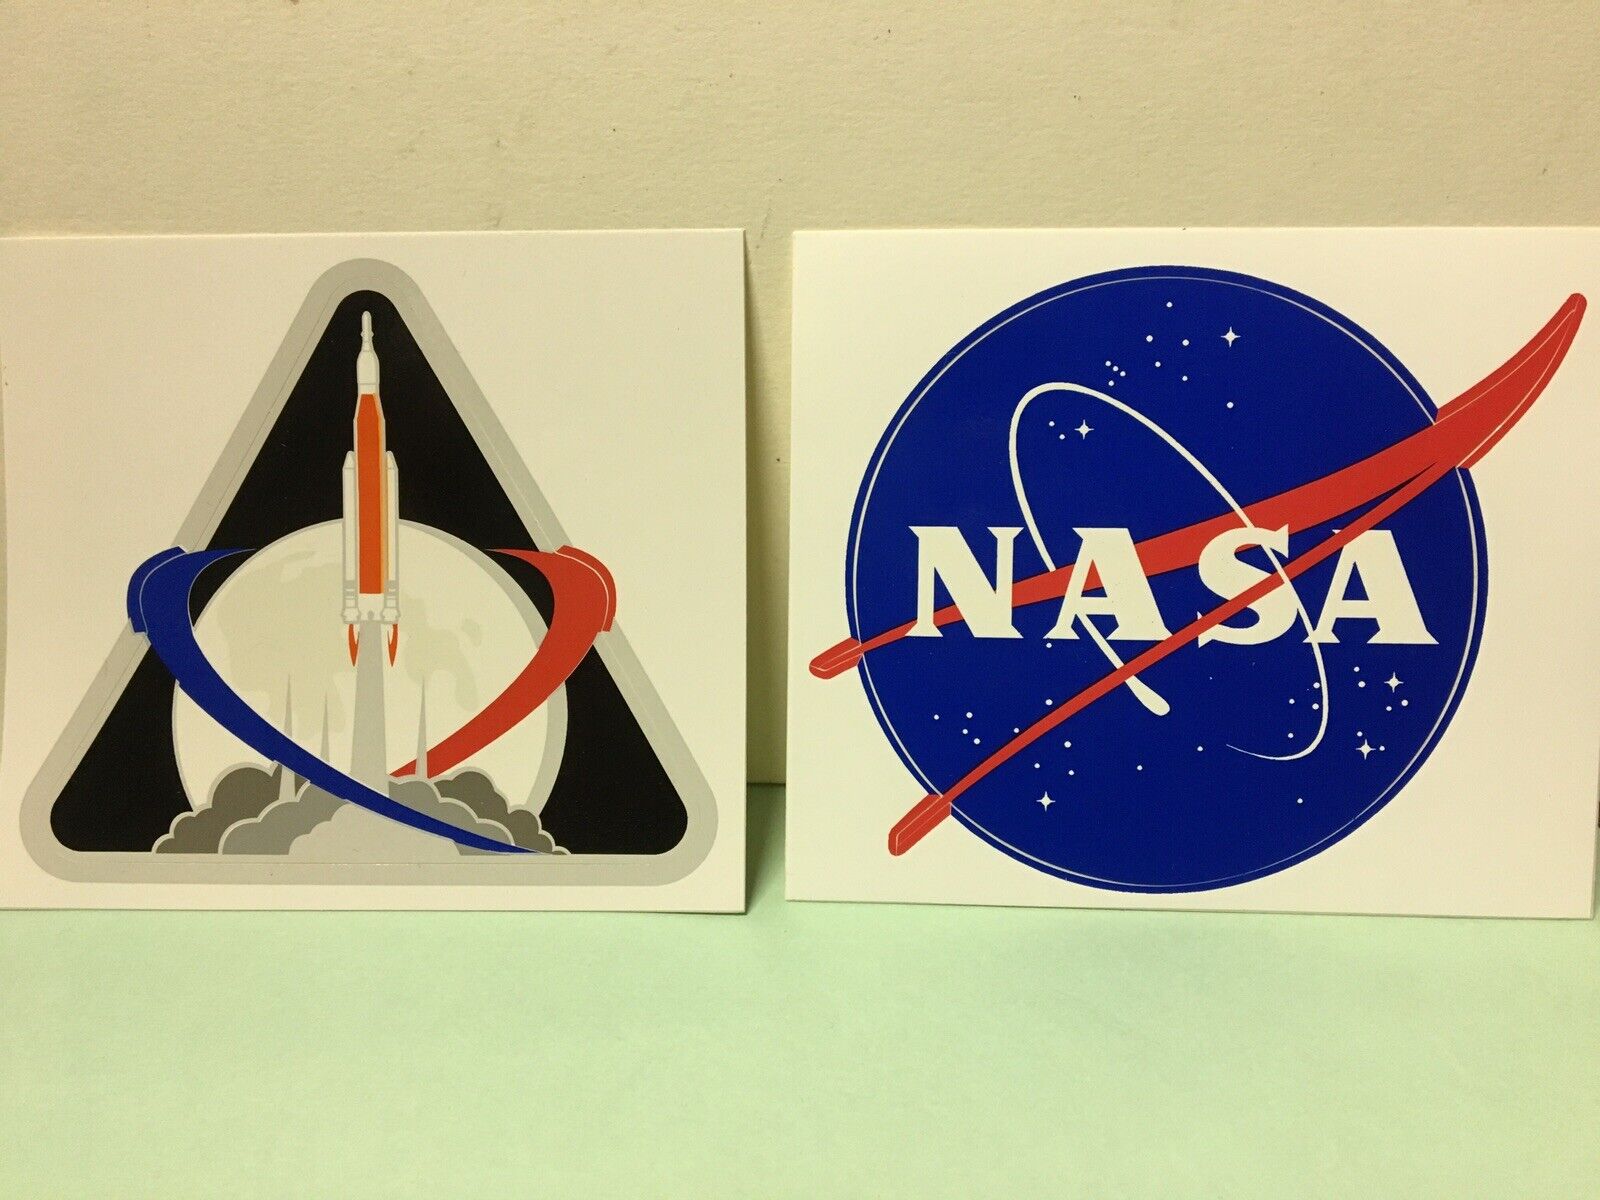 Nasa Official Exploration Mission-1 (EM-1)decal Plus Nasa Meatball Decal